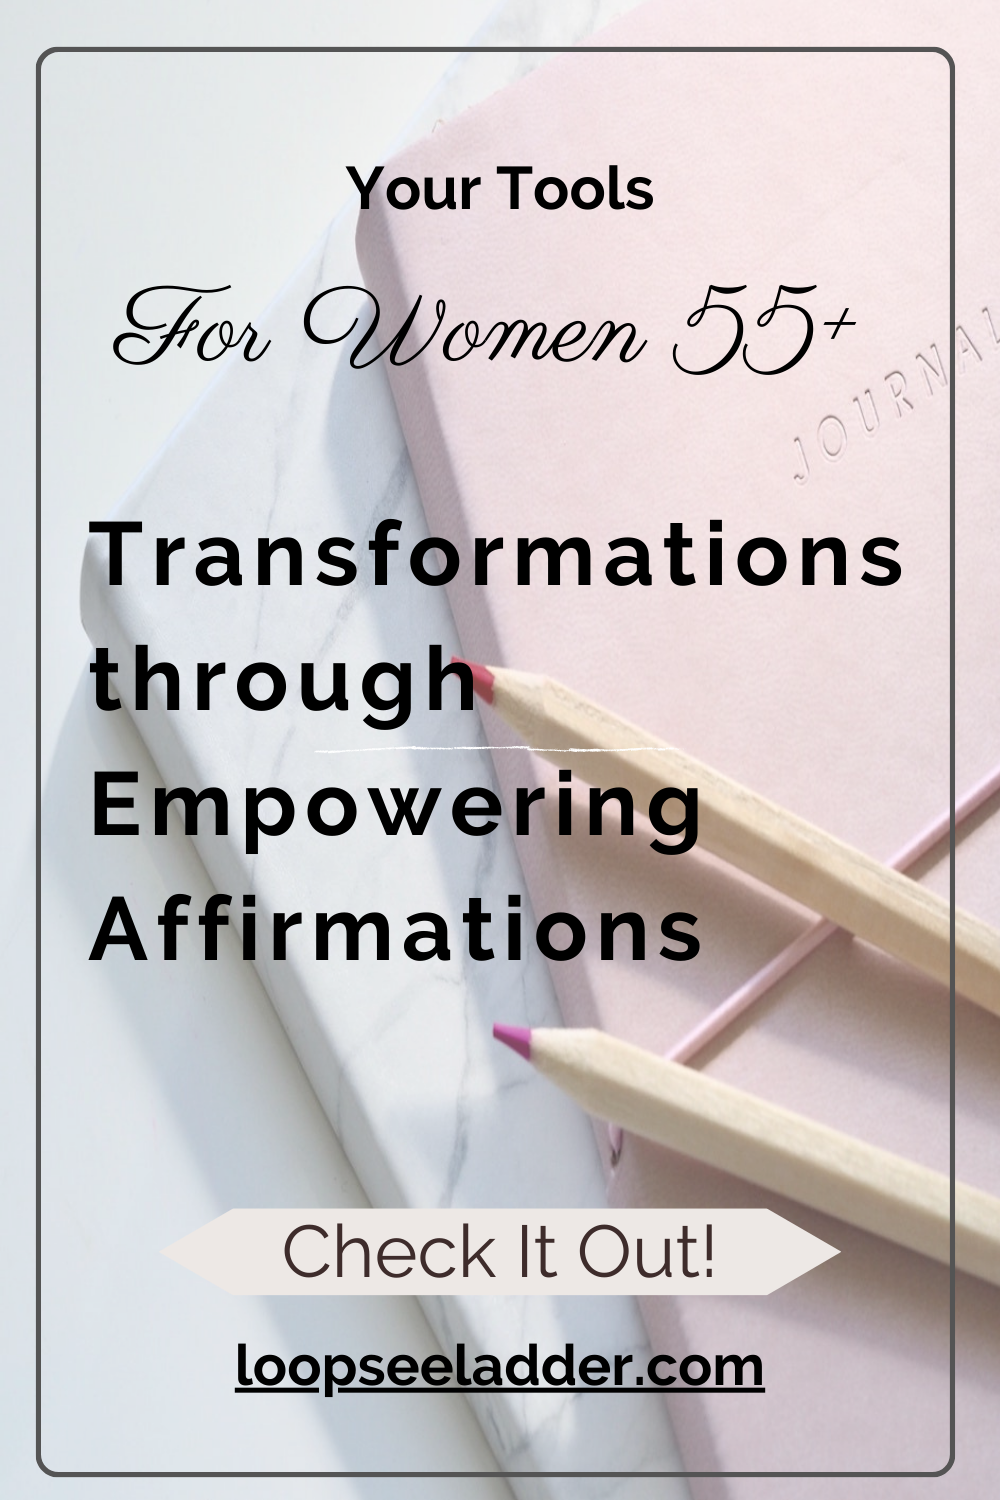 5 Remarkable Transformations: How Affirmations Empower Women 55+